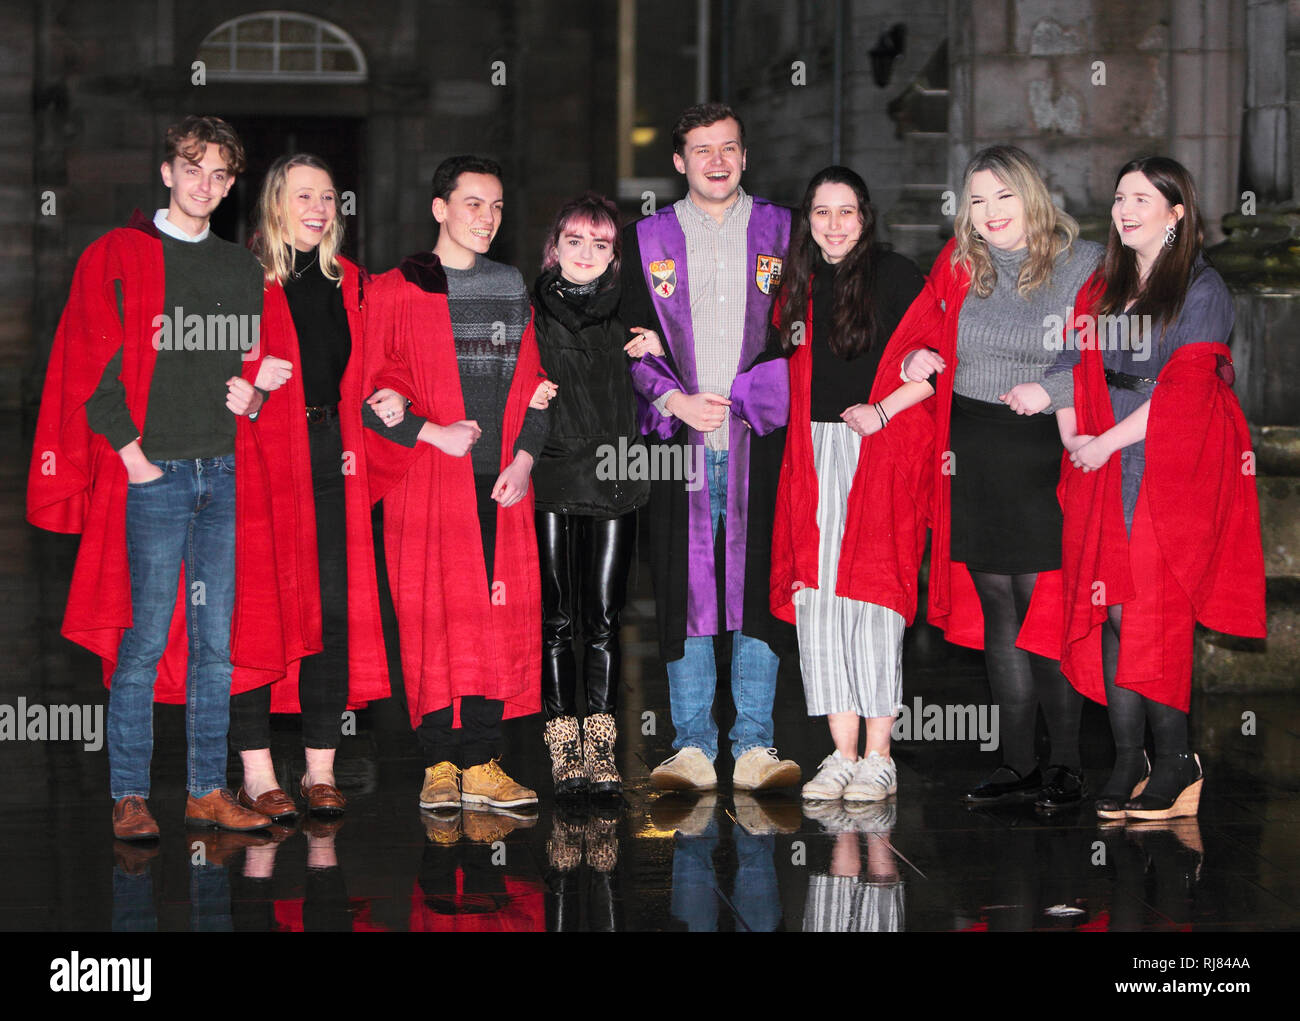 St Andrews Fife, Scotland, UK. 5th Feb, 2019. Maisie Williams, promoting her new social networking app for young artists, with students from St Andrews University, before appearing at the university's Younger Hall, Tuesday 5th of February 2019, St Andrews Fife, Scotland, UK Credit: Derek Allan/Alamy Live News Stock Photo